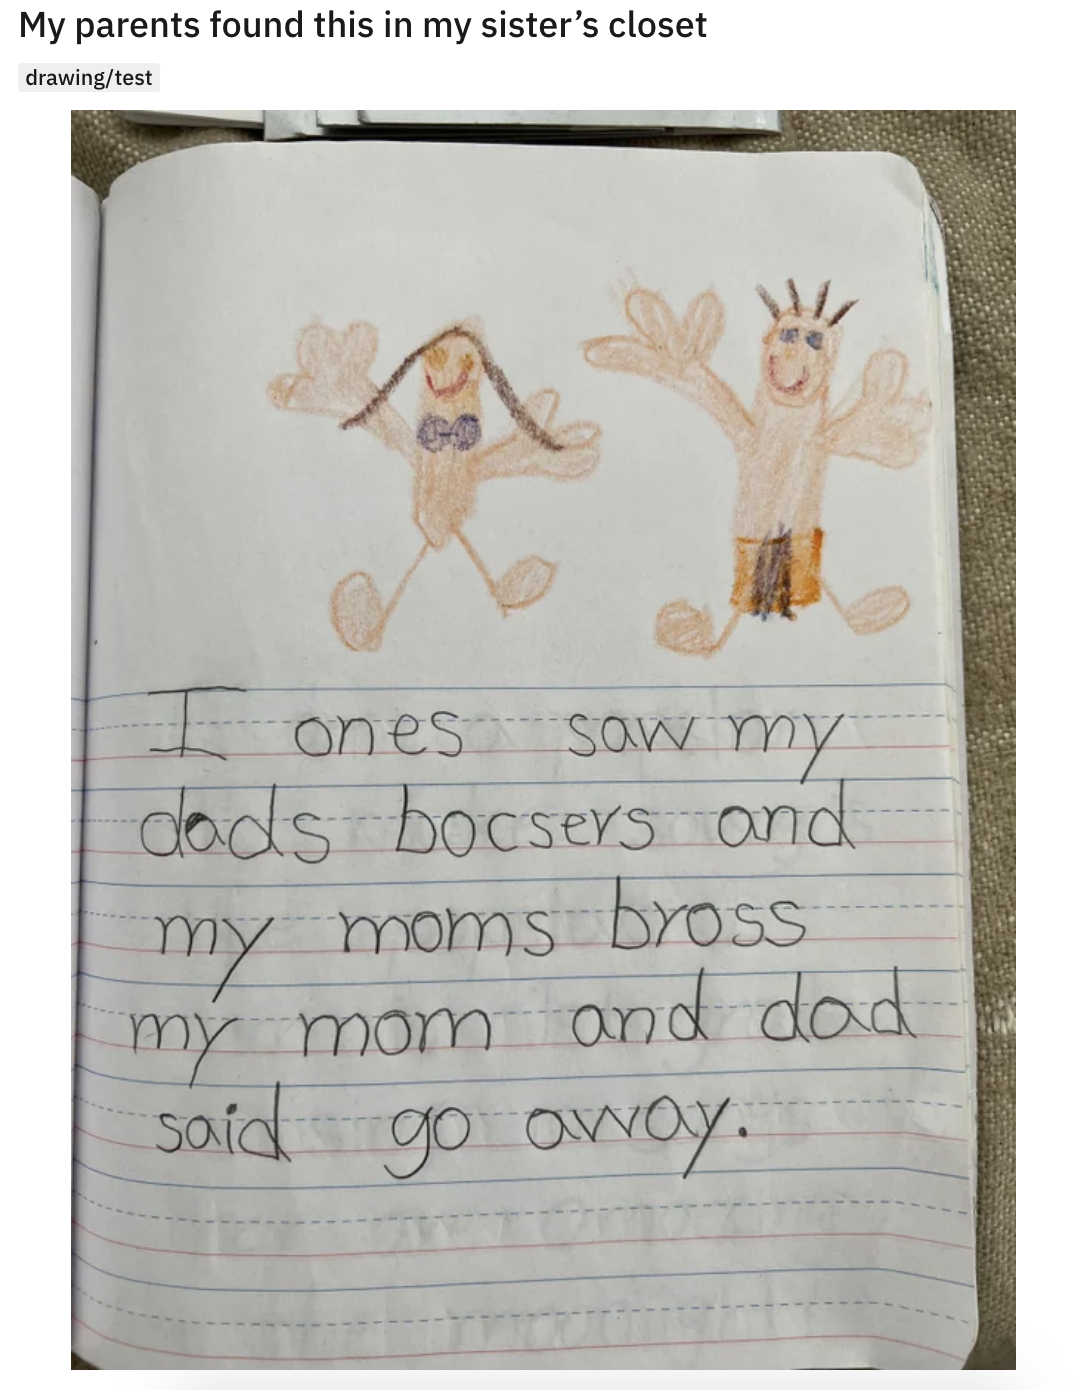 a kid&#x27;s drawing with a story that they saw their dad&#x27;s boxers and their mom&#x27;s bra and the parents said go away